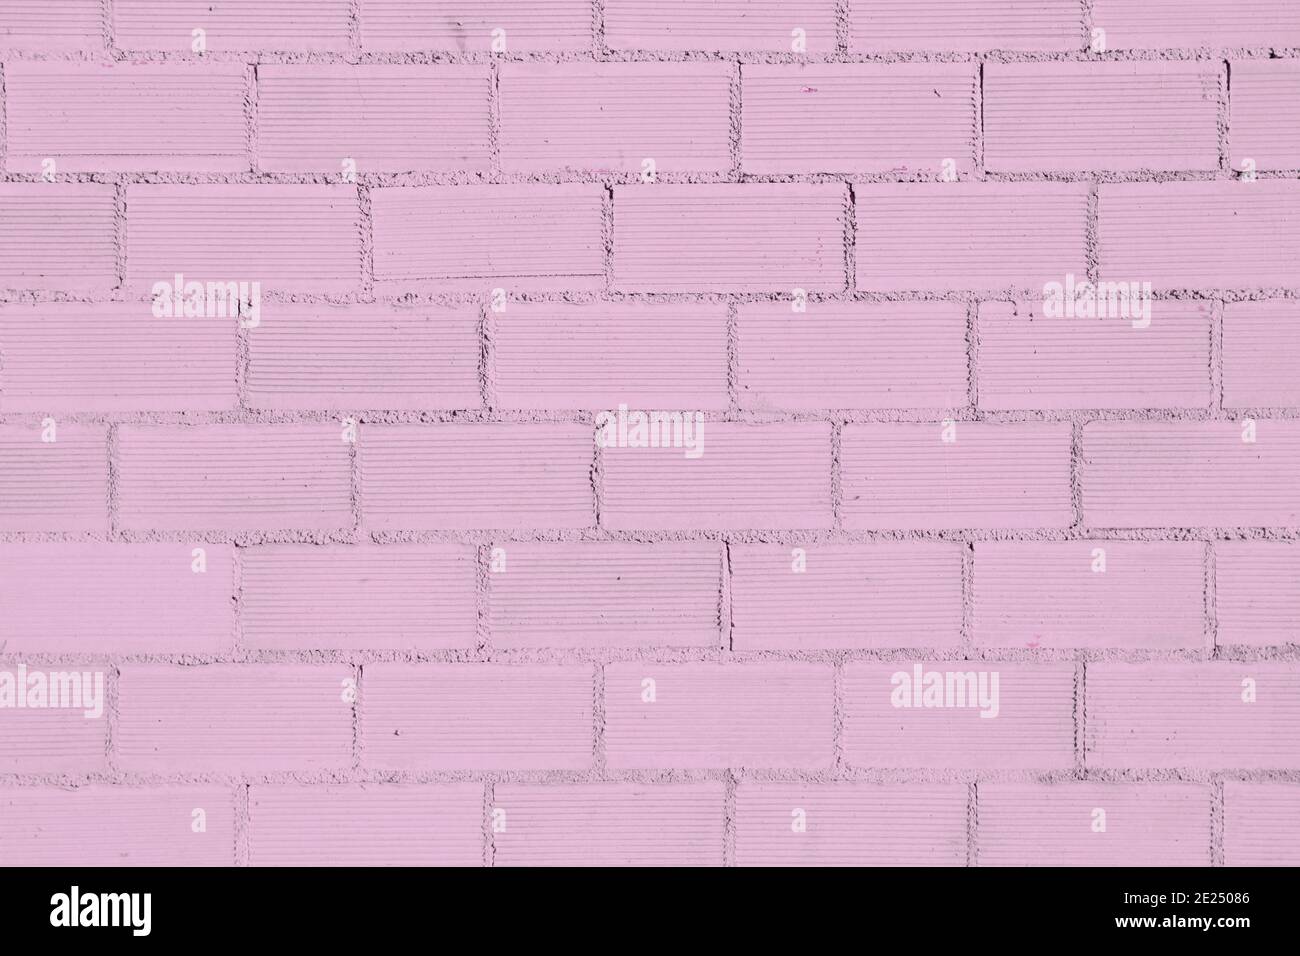 Pink colored old brickwall background Stock Photo